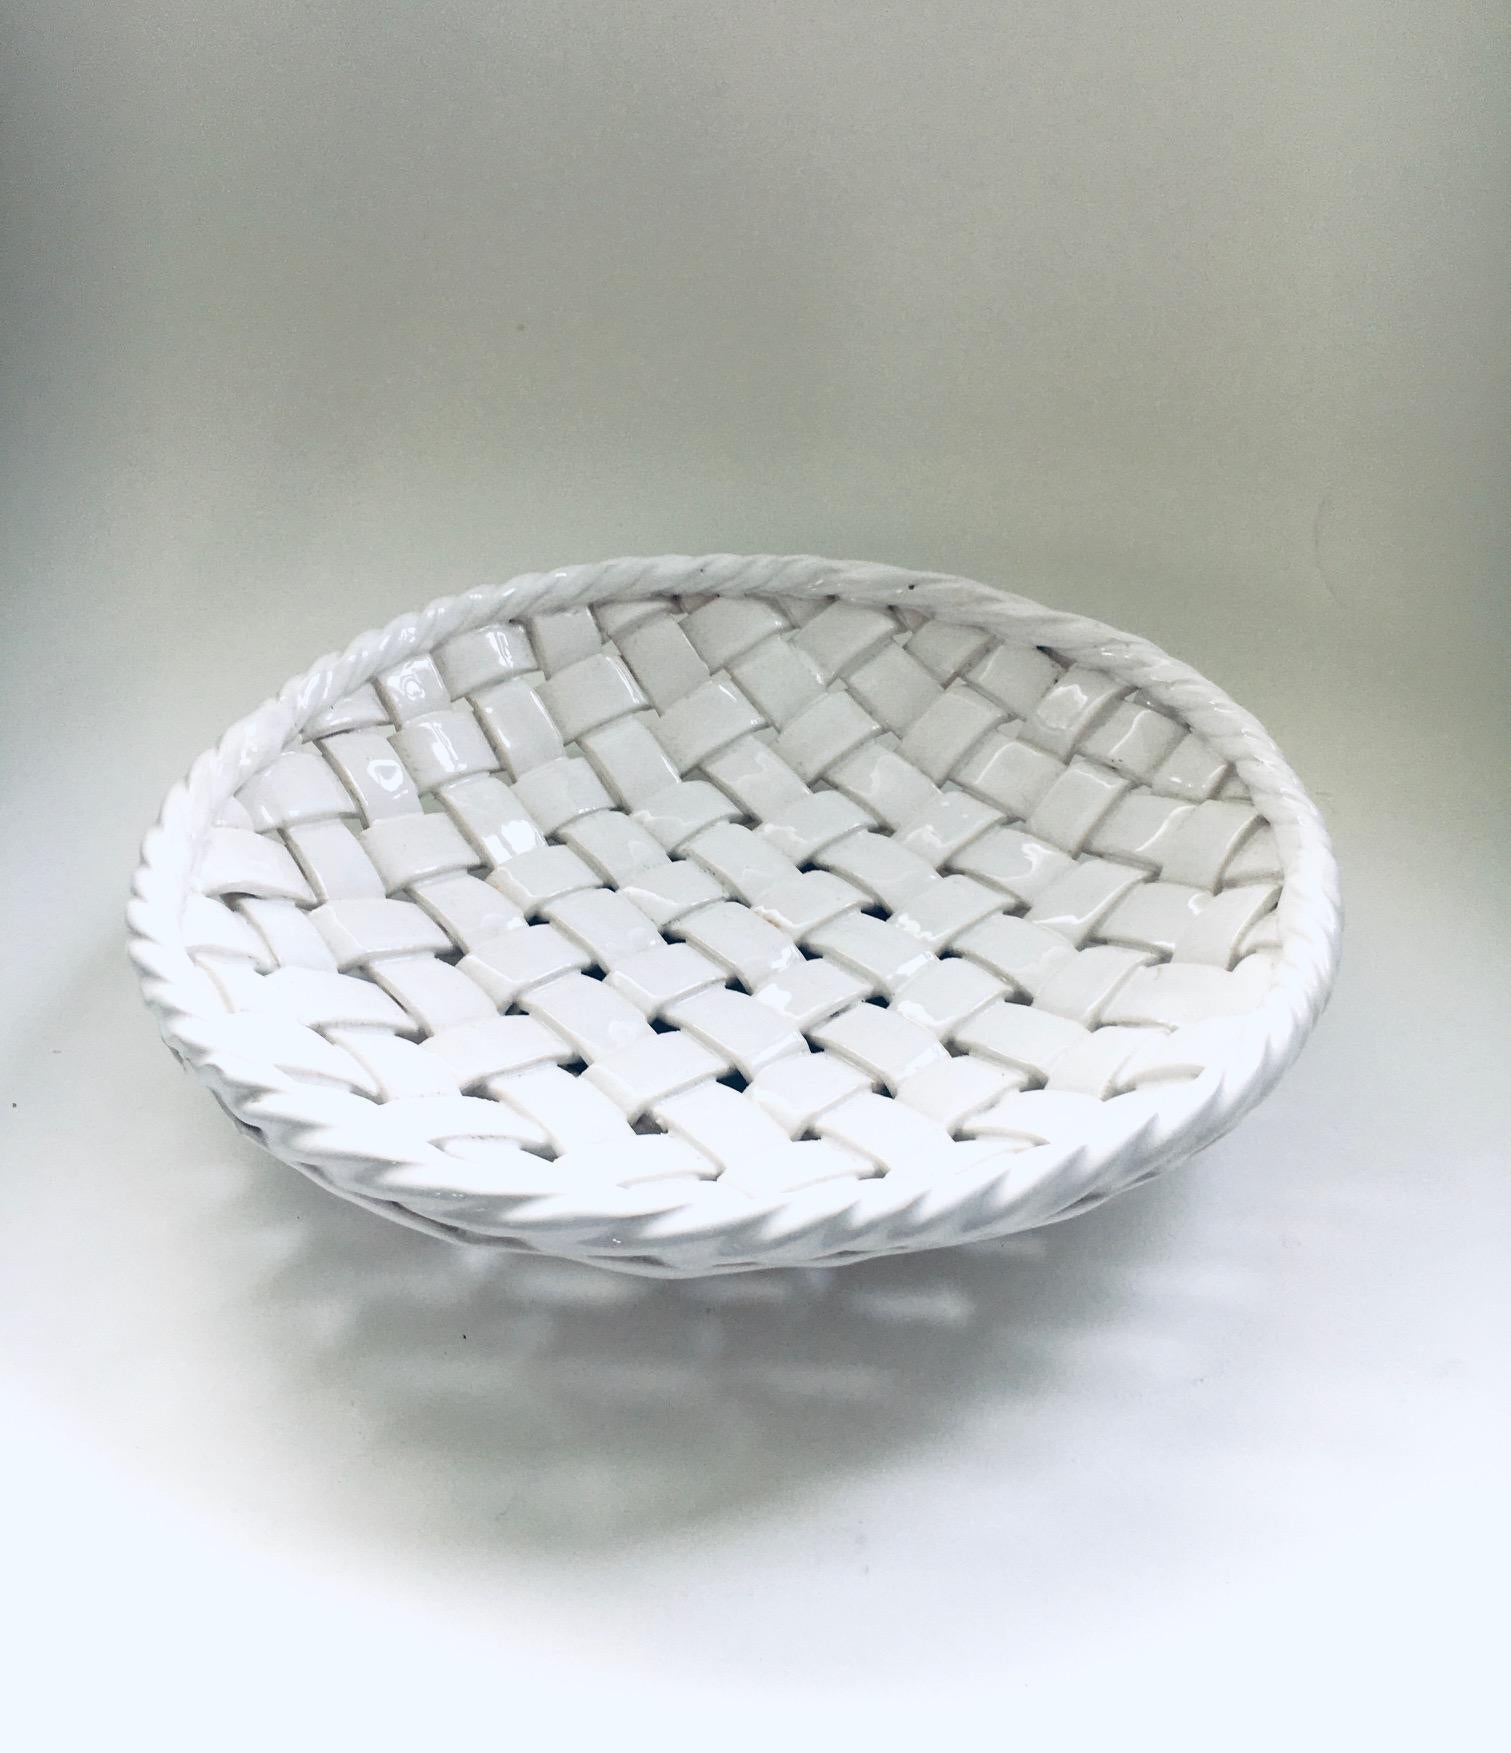 Vintage Hand Made White Braided Ceramic XL Fruit Bowl. Made in France, 1960's period. Basketweave woven earthenware white glazed bowl with twisted border. Comes in very good condition. Measures 7cm x 32cm x 32cm.